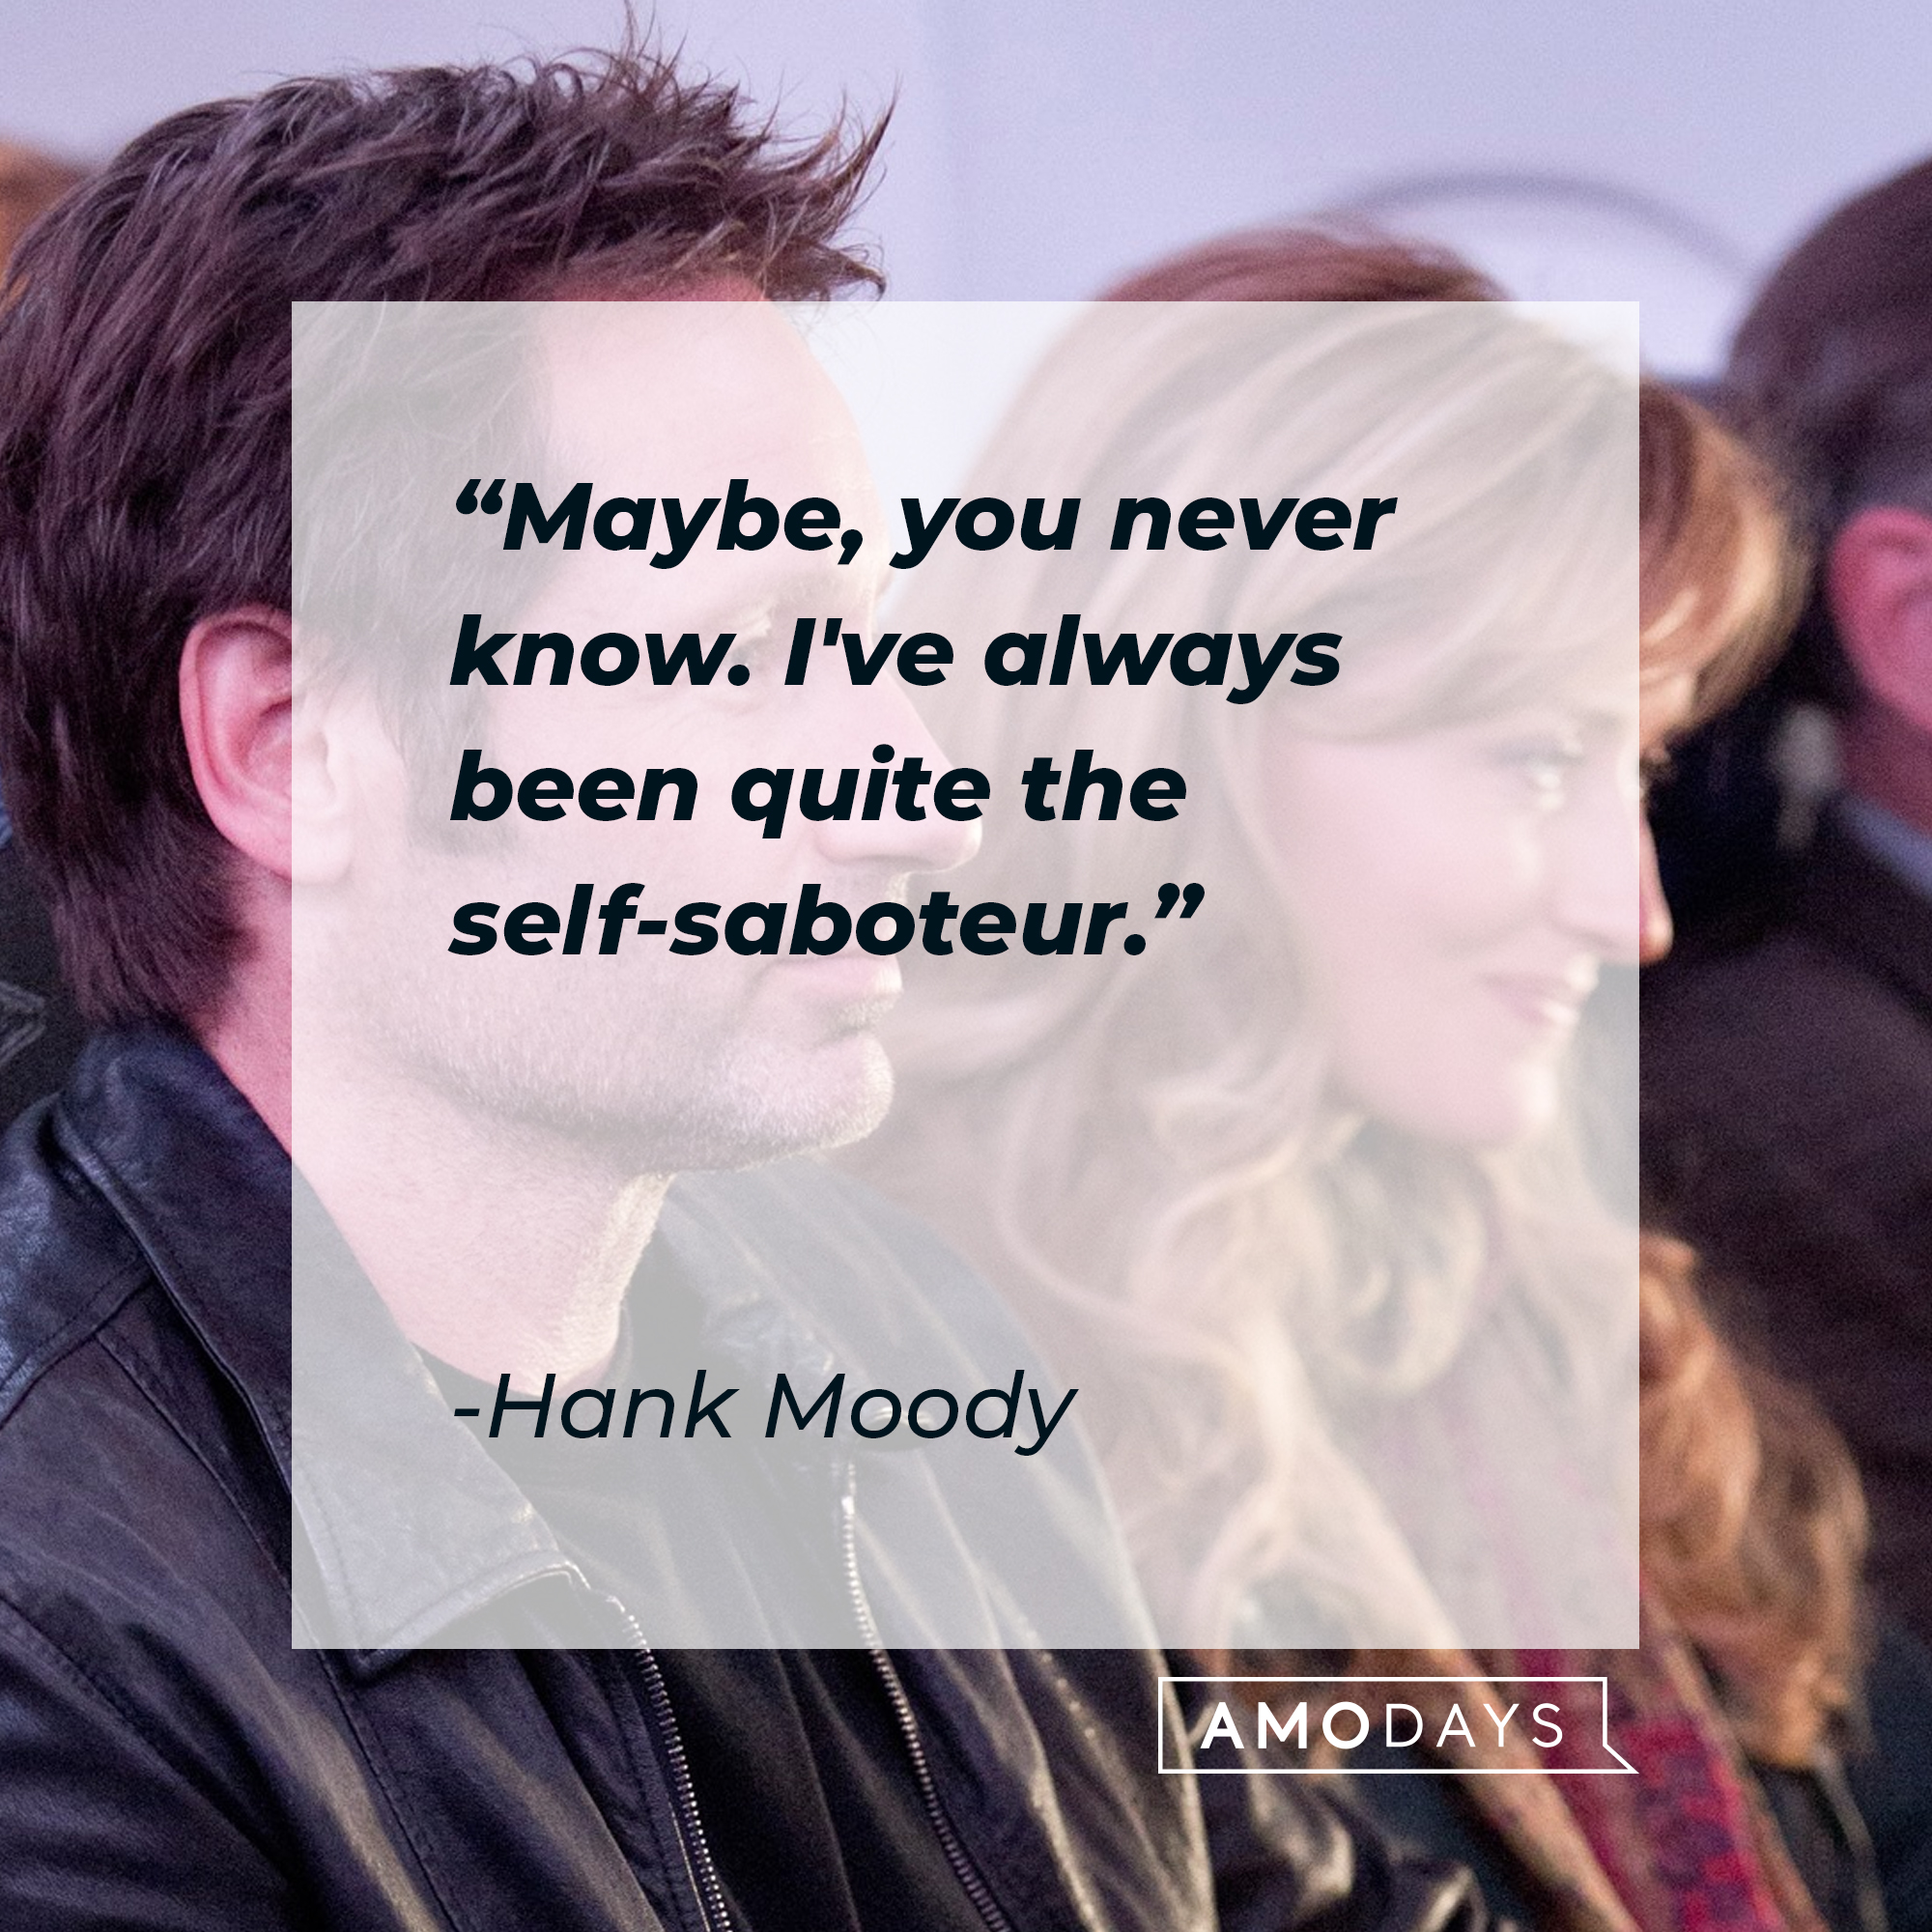 Hank Moody's quote: "Maybe, you never know. I've always been quite the self-saboteur." | Image: AmoDays